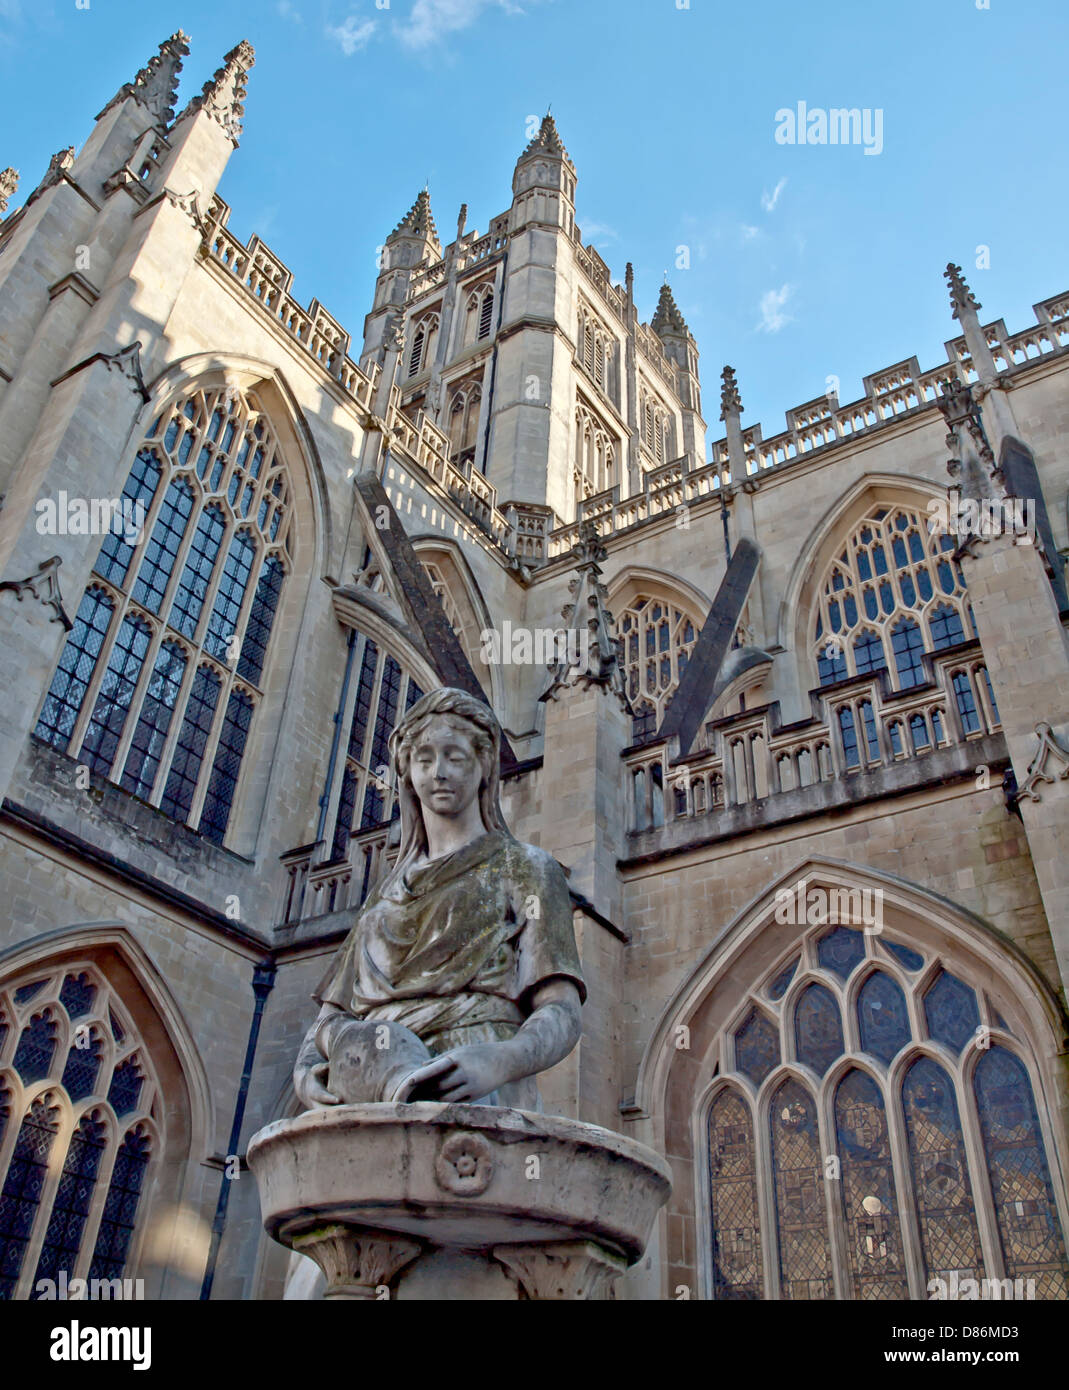 A Part of beautiful Bath ABBEY building with a sculpture and blue sky, UK Stock Photo